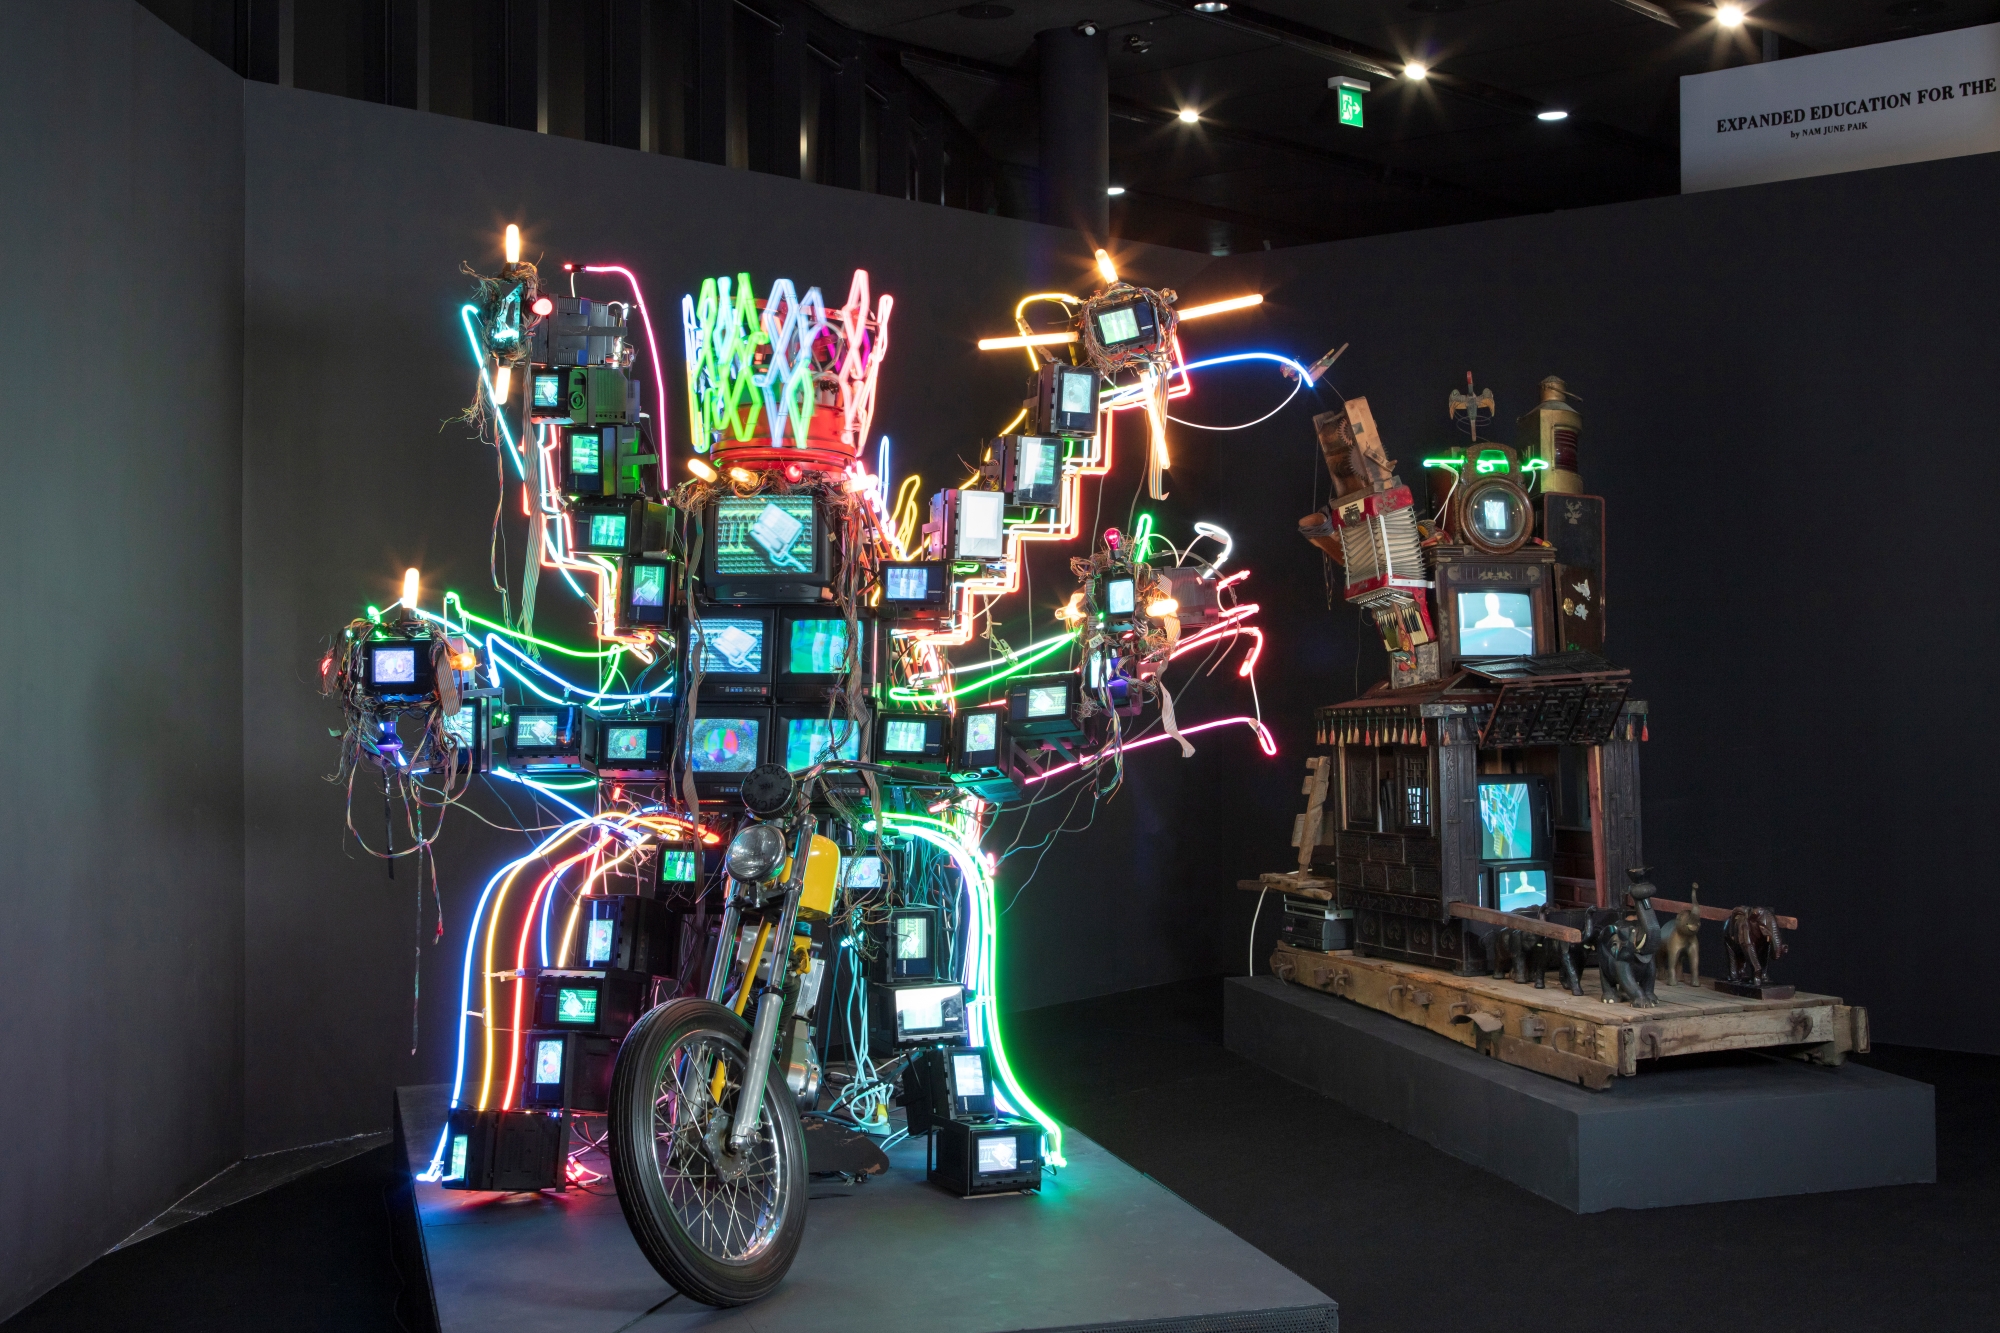 Two sculptural installation artworks side by side, both of which use multiple television monitors. The work on the right also uses colored neon and the basic form of a motorcycle.